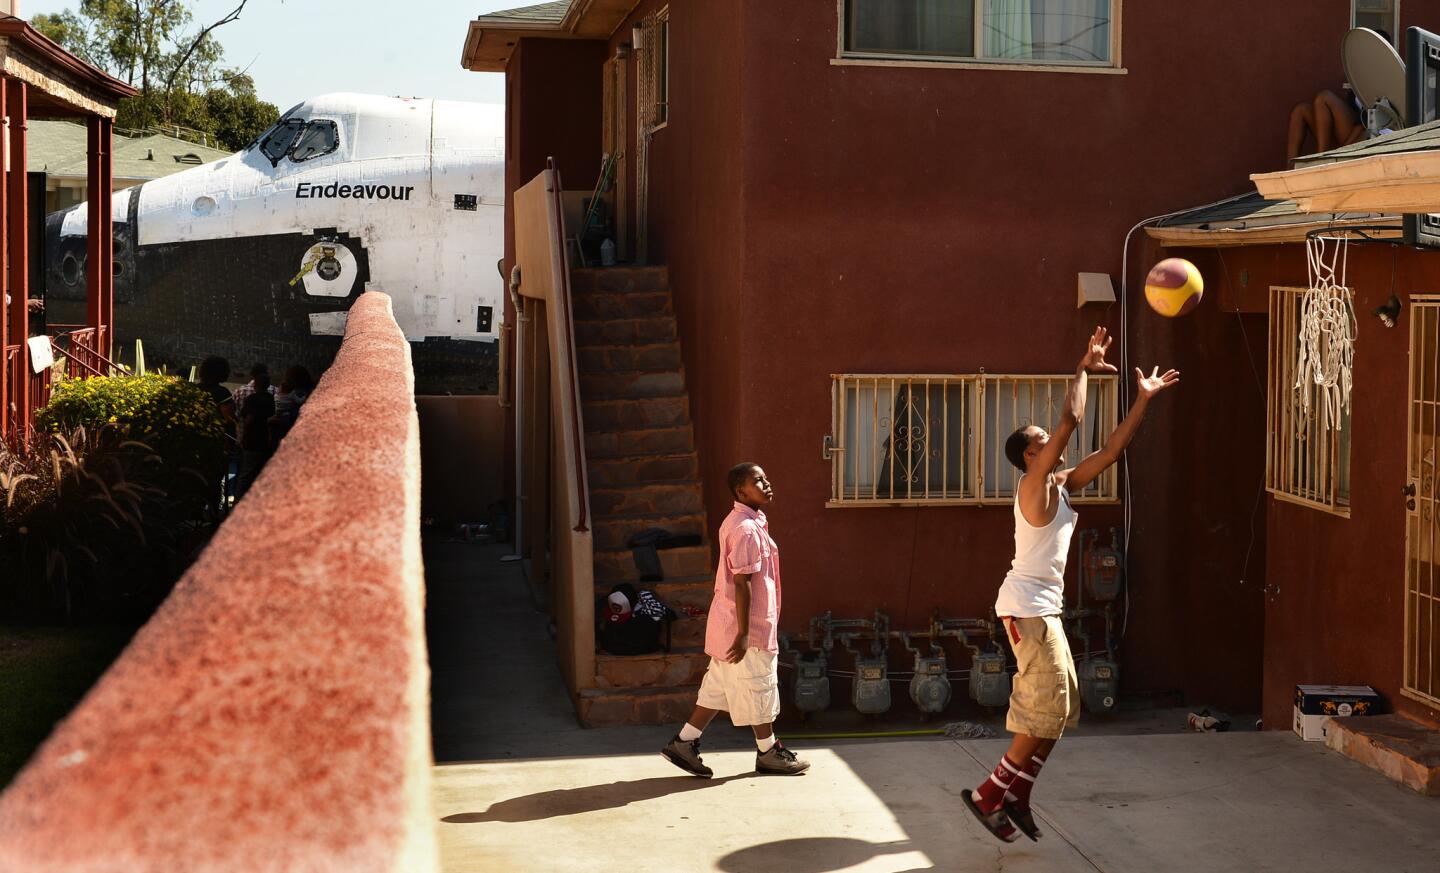 Traymond Harris, left, and Ryan Hudge play basketball as the space shuttle Endeavour passes by on Crenshaw Avenue in Inglewood.